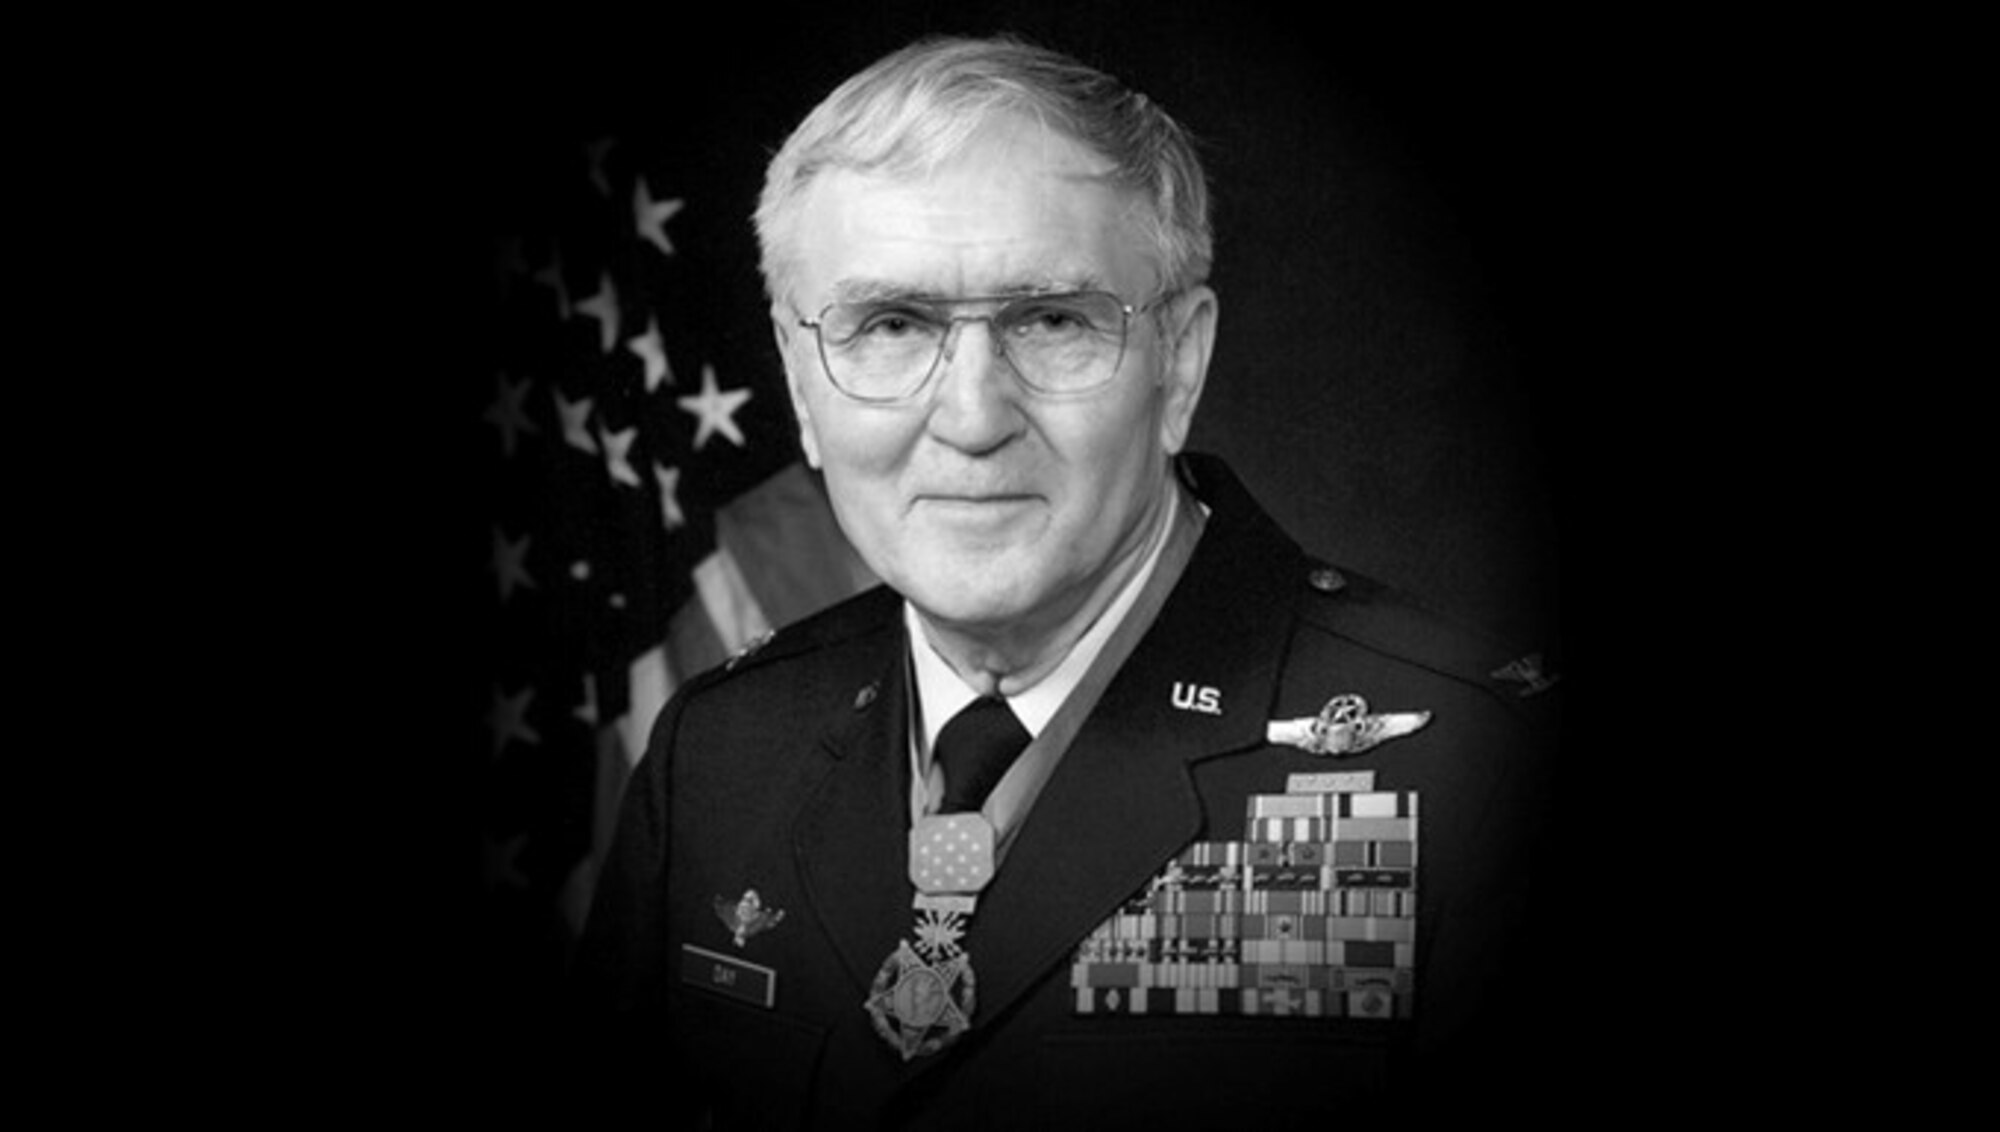 George Everett "Bud" Day is a retired Air Force colonel and command pilot who served during the Vietnam War. He is often cited as being the most decorated U.S. service member since Gen. Douglas MacArthur, having received some 70 decorations, a majority for actions in combat. (Courtesy photo) 
